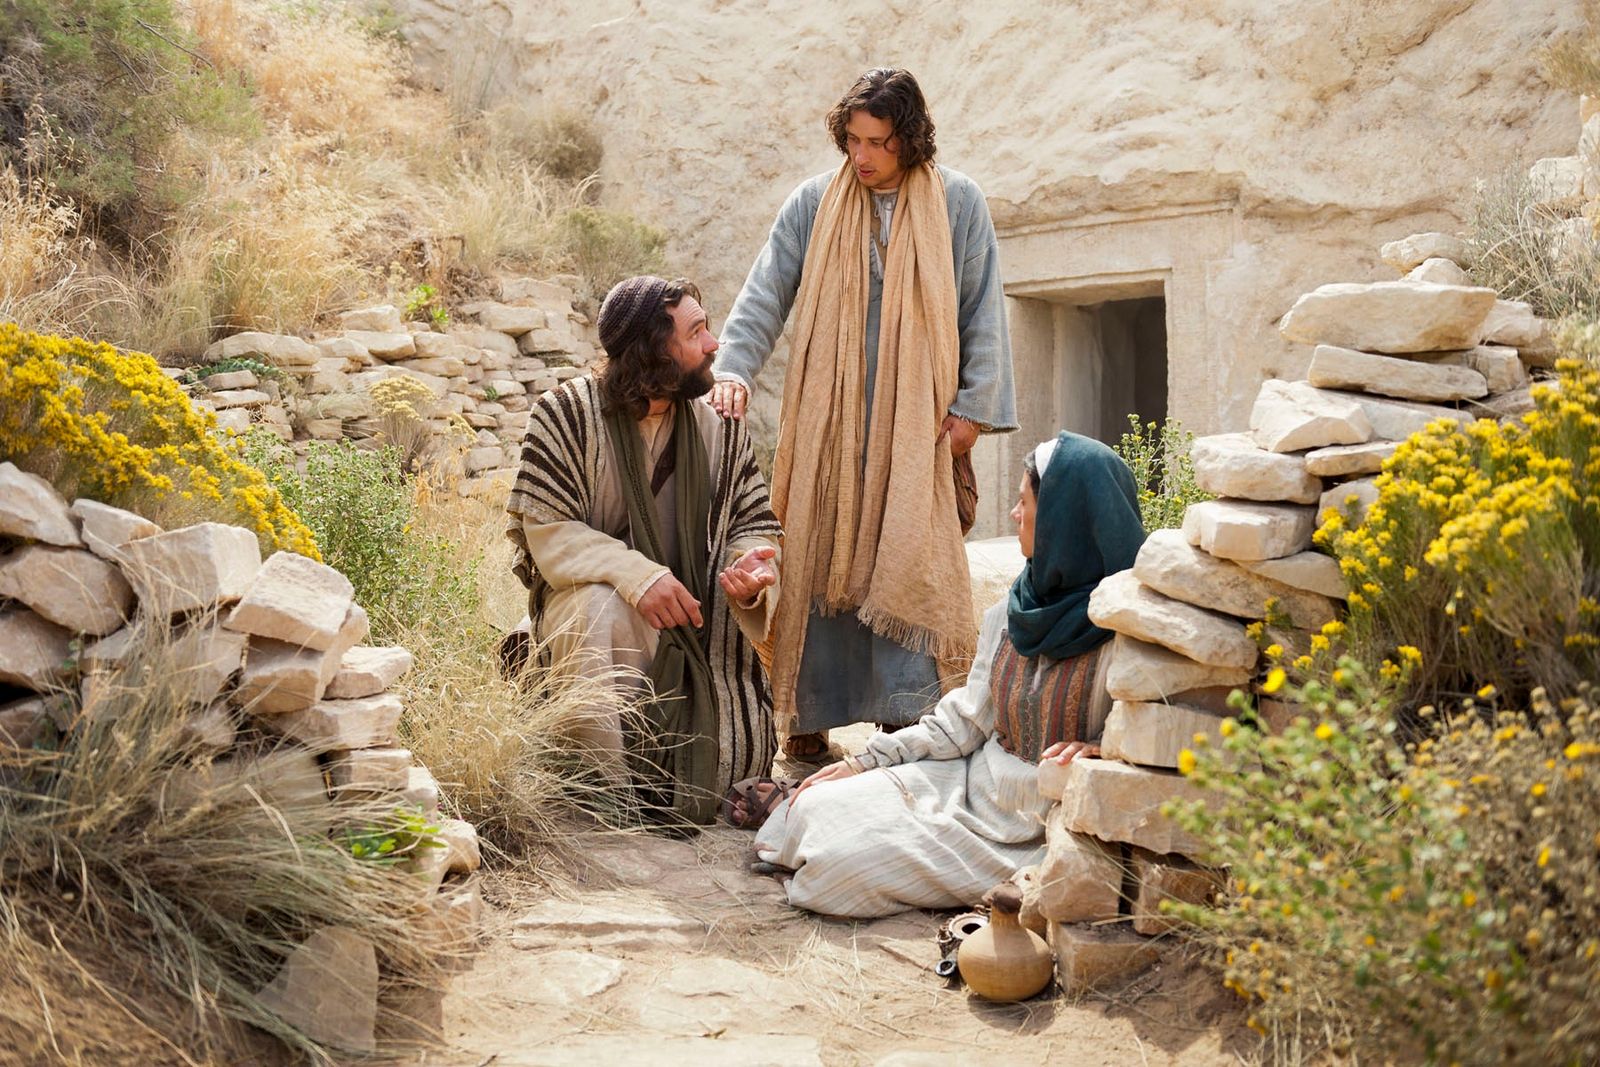 Peter and John invite Mary Magdalene to come back with them.